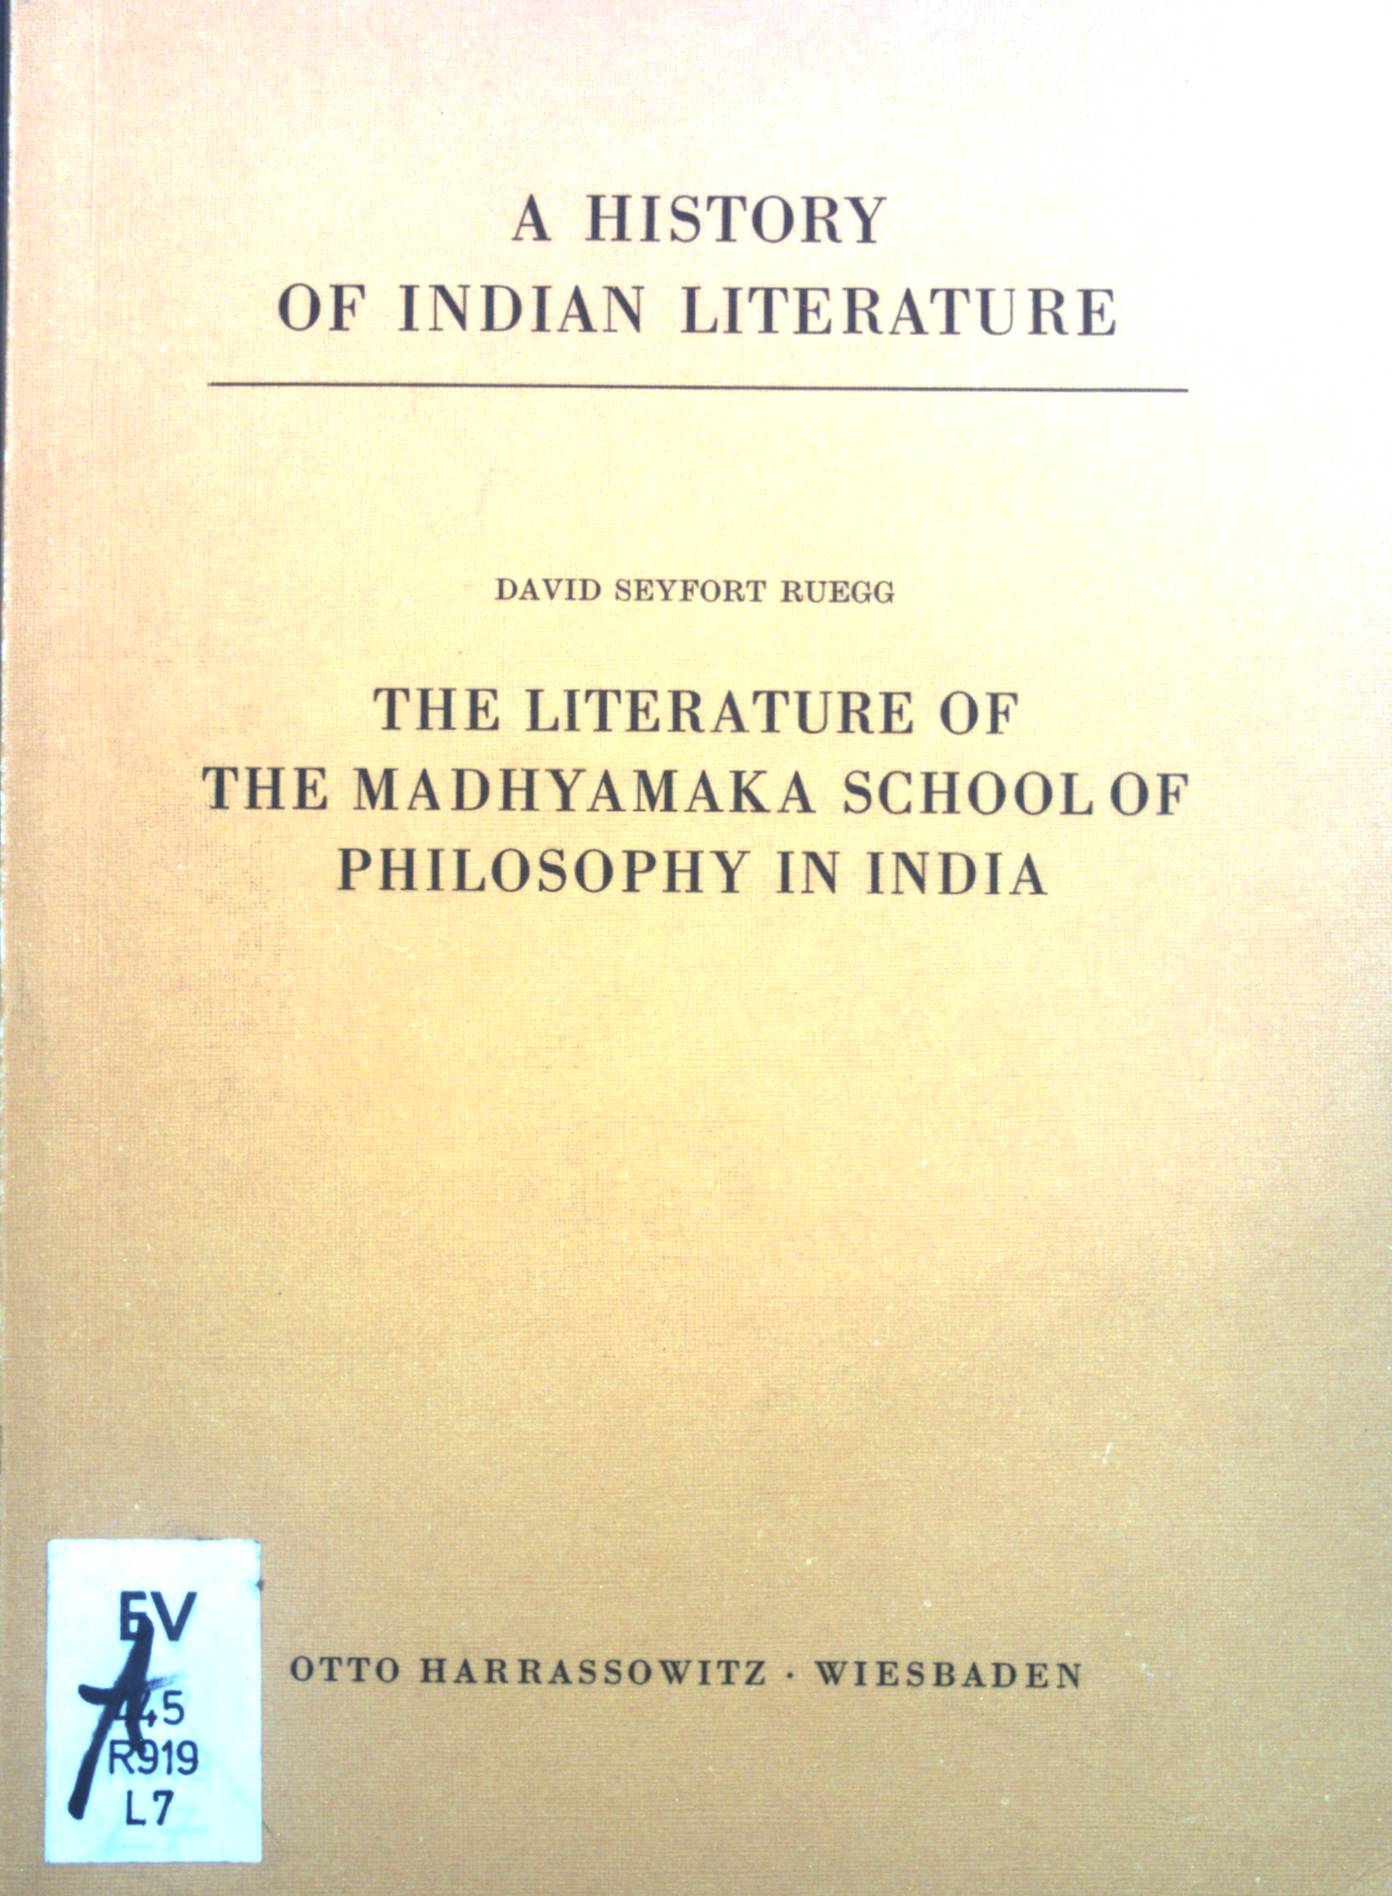 The literature of the Madhyamaka School of Philosophy in India. A history of Indian literature ; Vol. VII, Fasc. 1 - Ruegg, David Seyfort